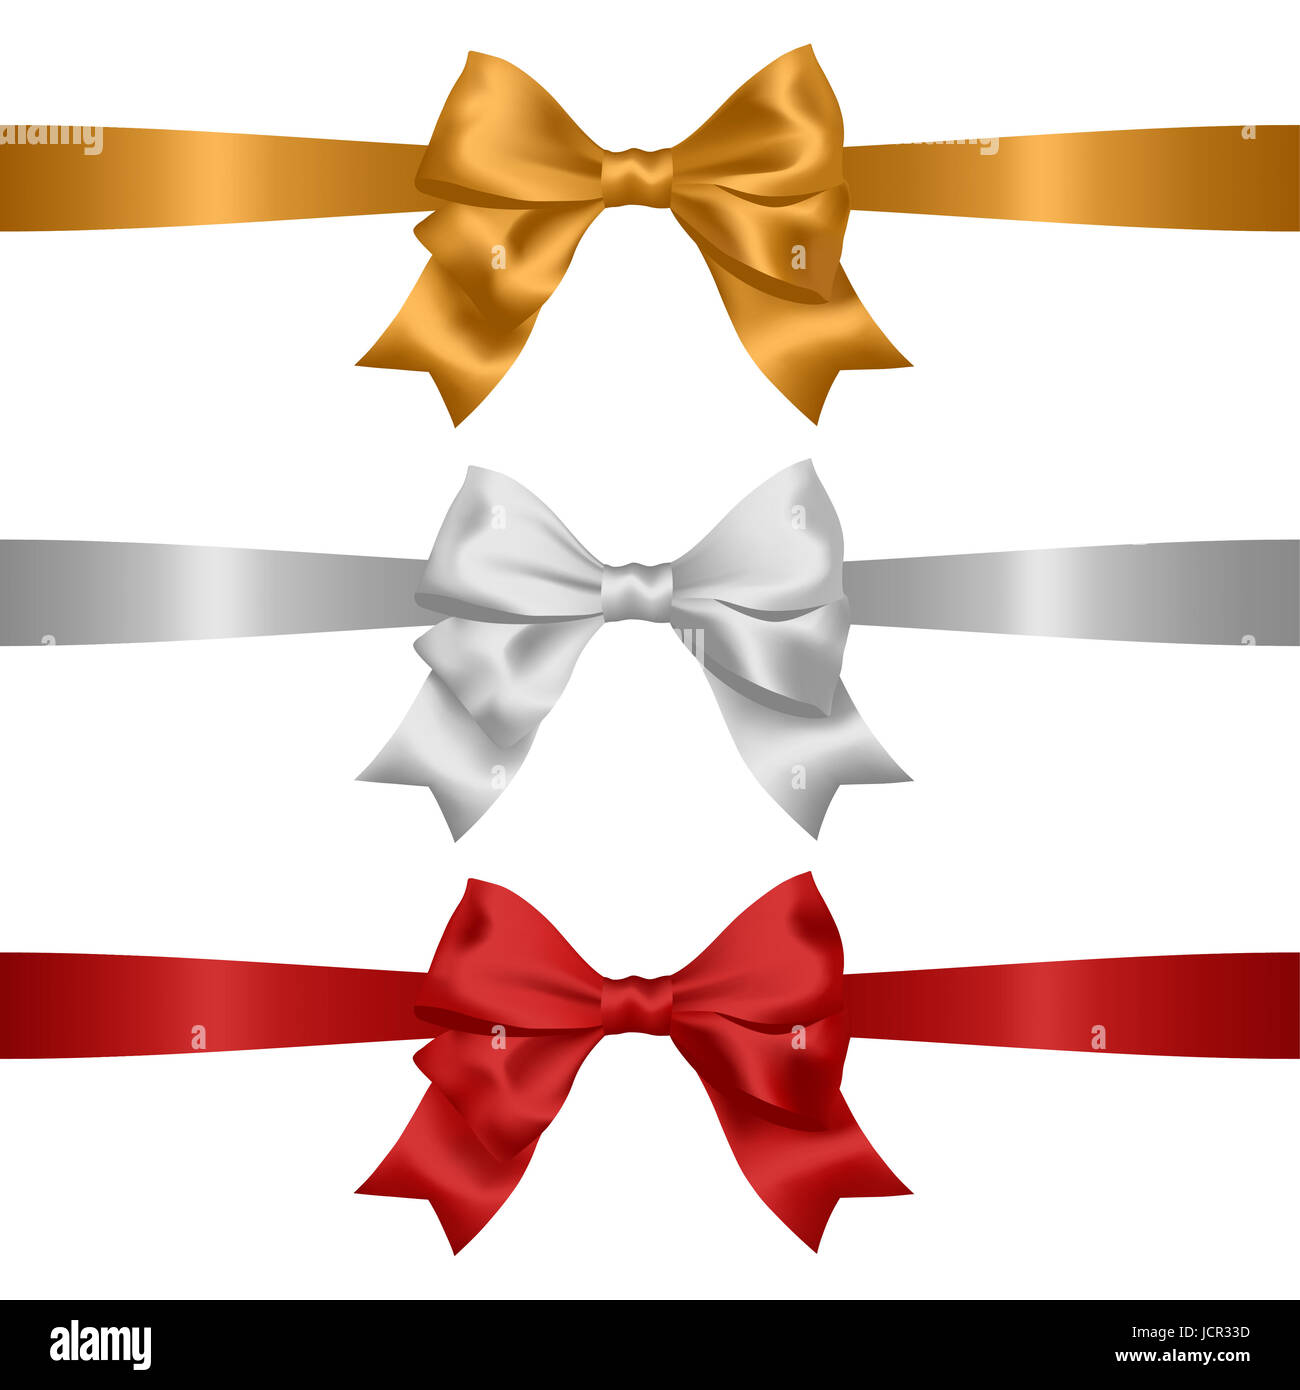 Vector ribbons with photorealistic bows. Stock Photo